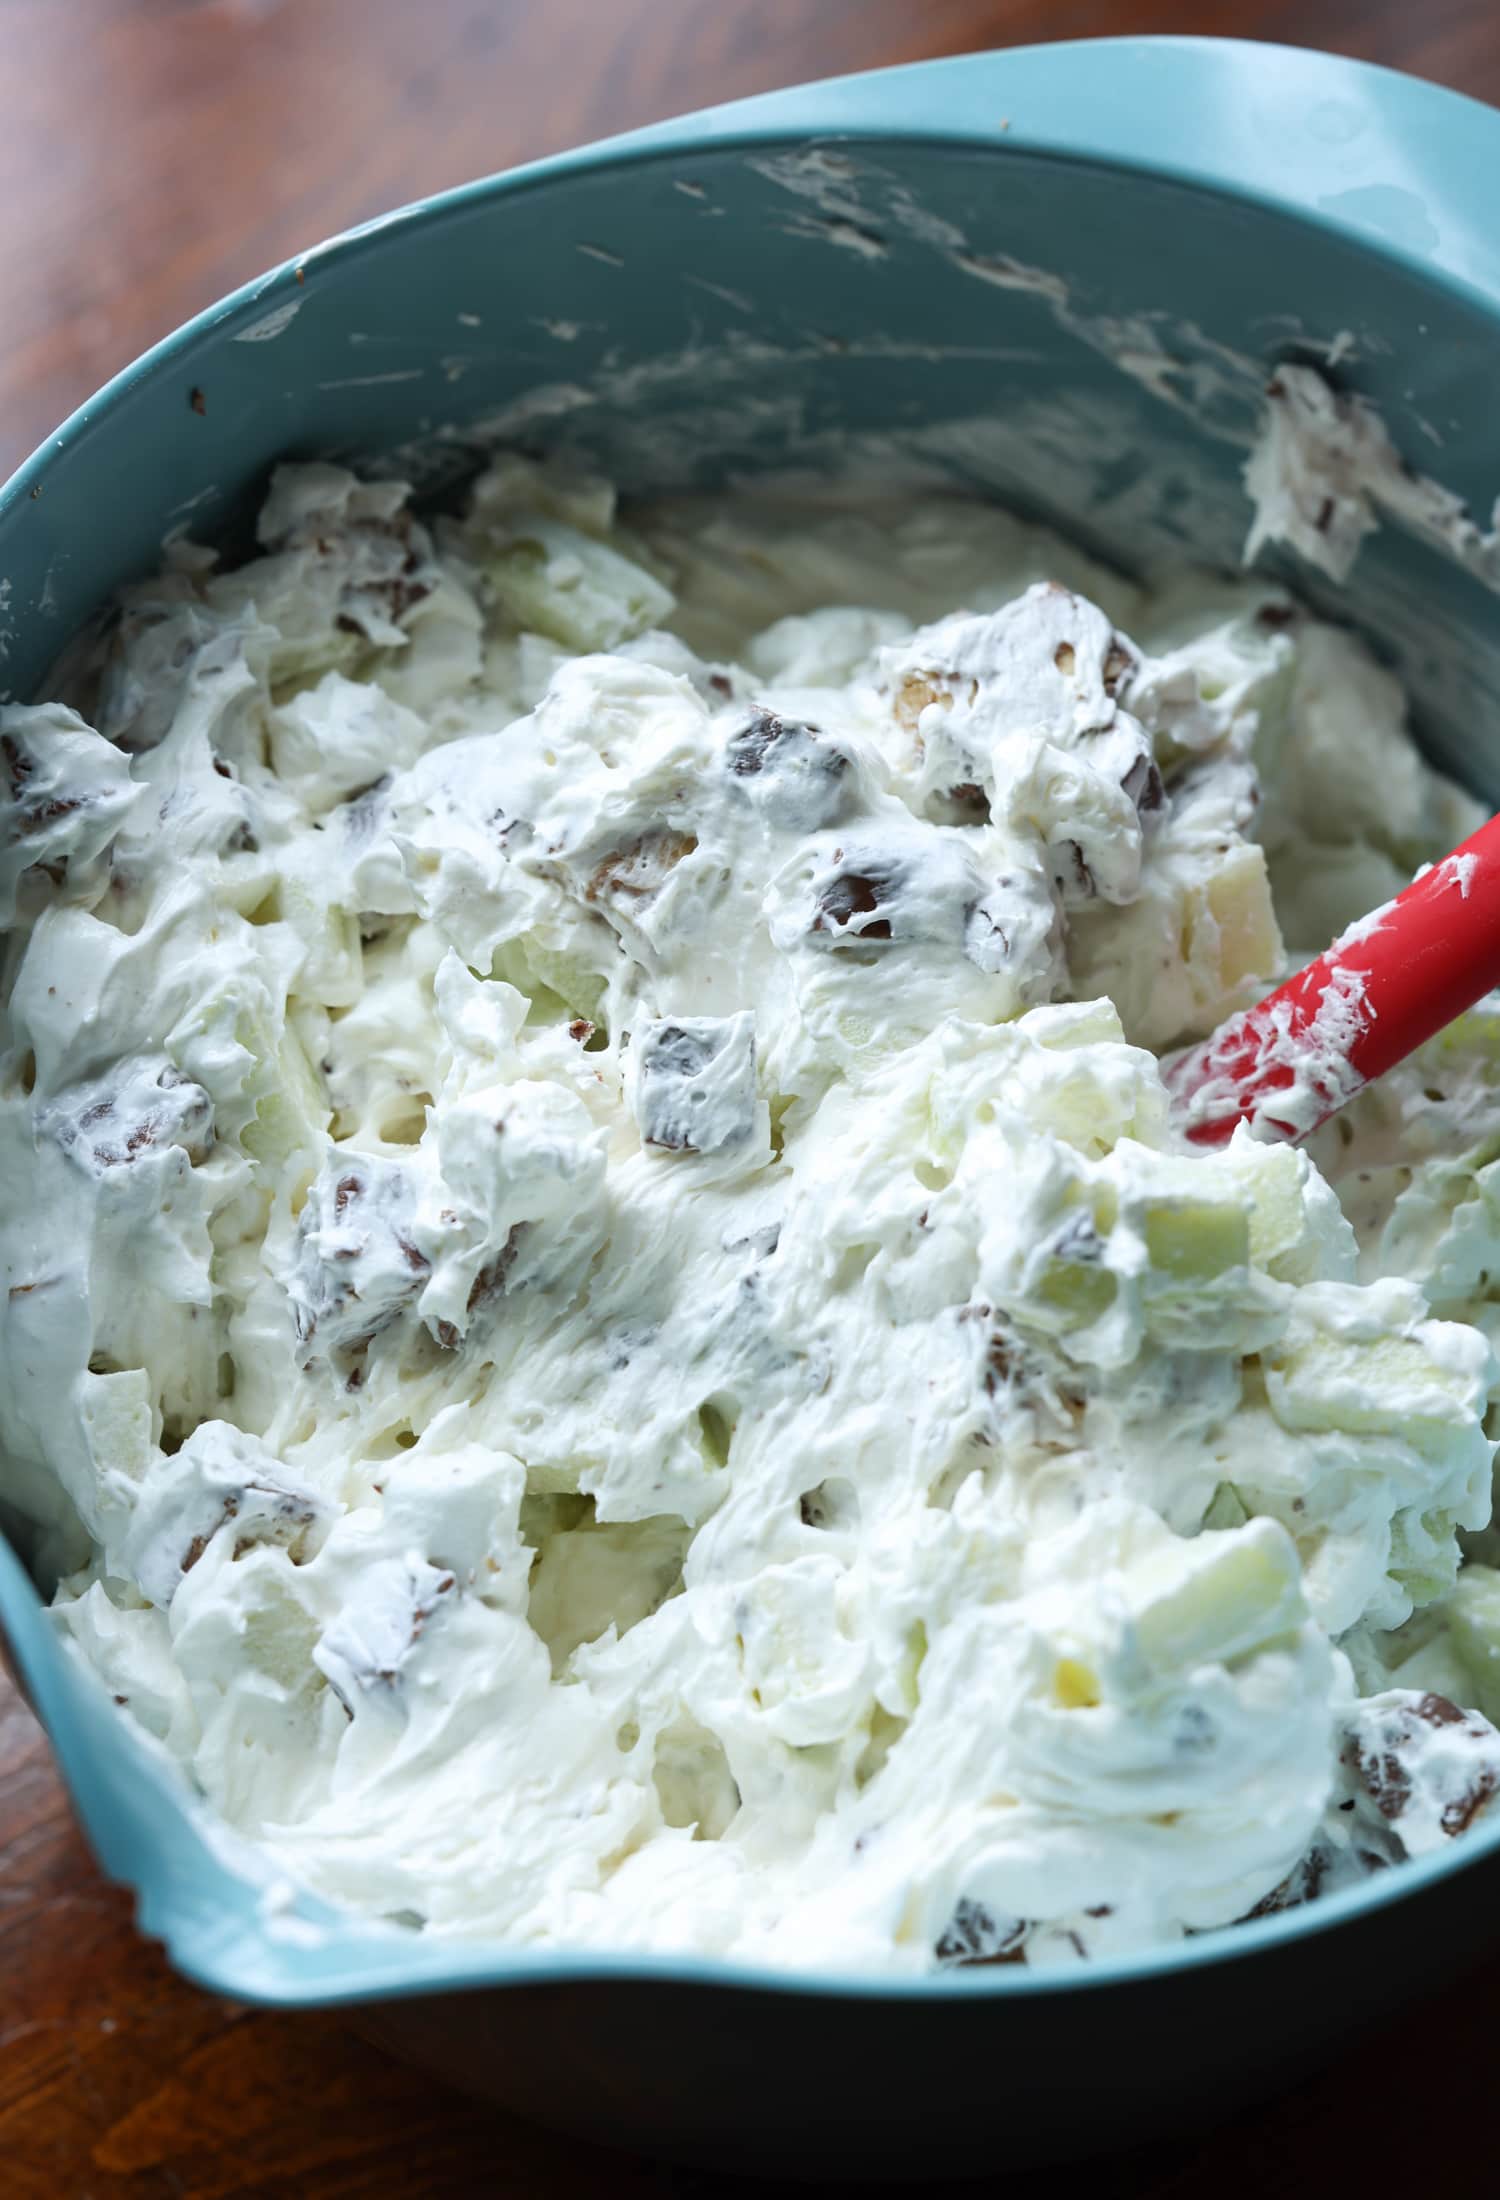 Place cream cheese, cool whip, chopped Snickers, chopped apple, and mini marshmallows into a mixing bowl using a red rubber spatula.